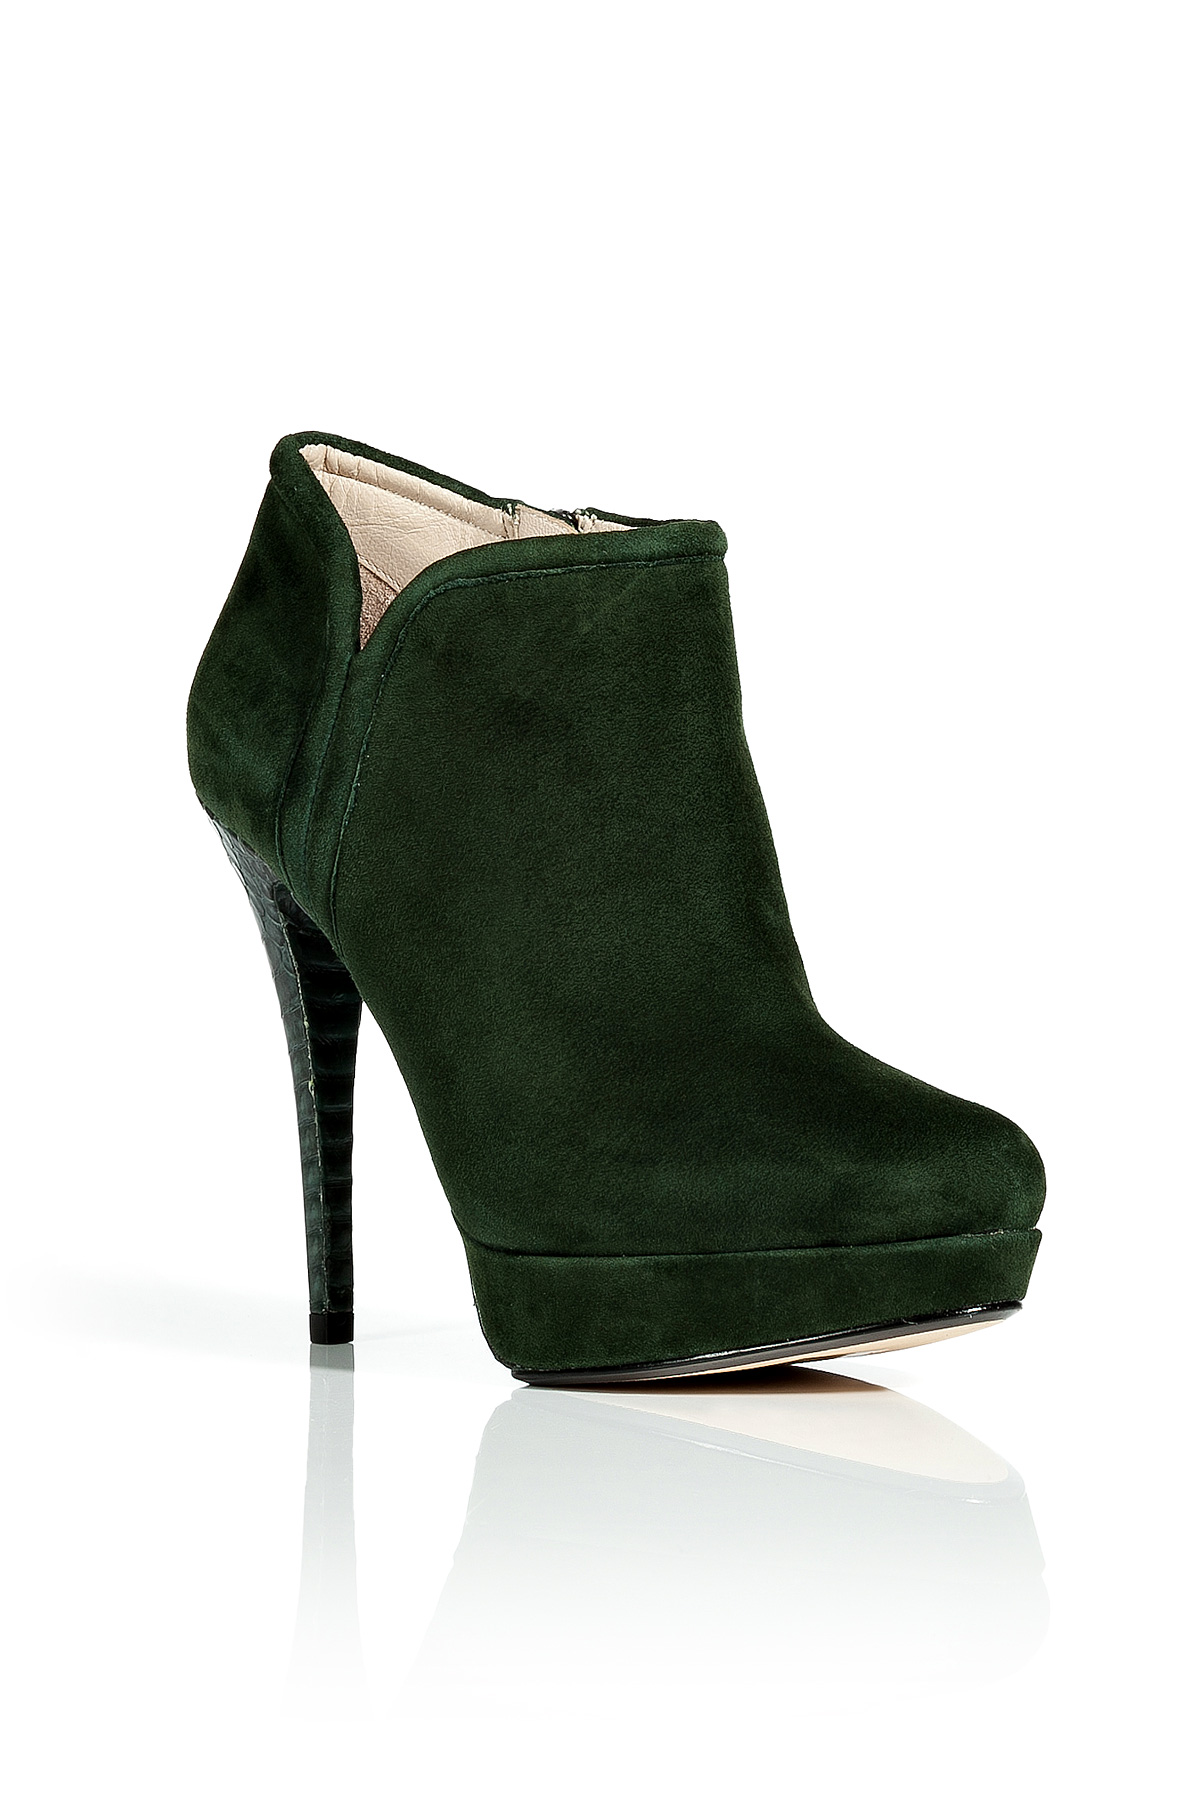 Lyst - Kors By Michael Kors Green Suede Ankle Boots with Snakeskin Heel ...